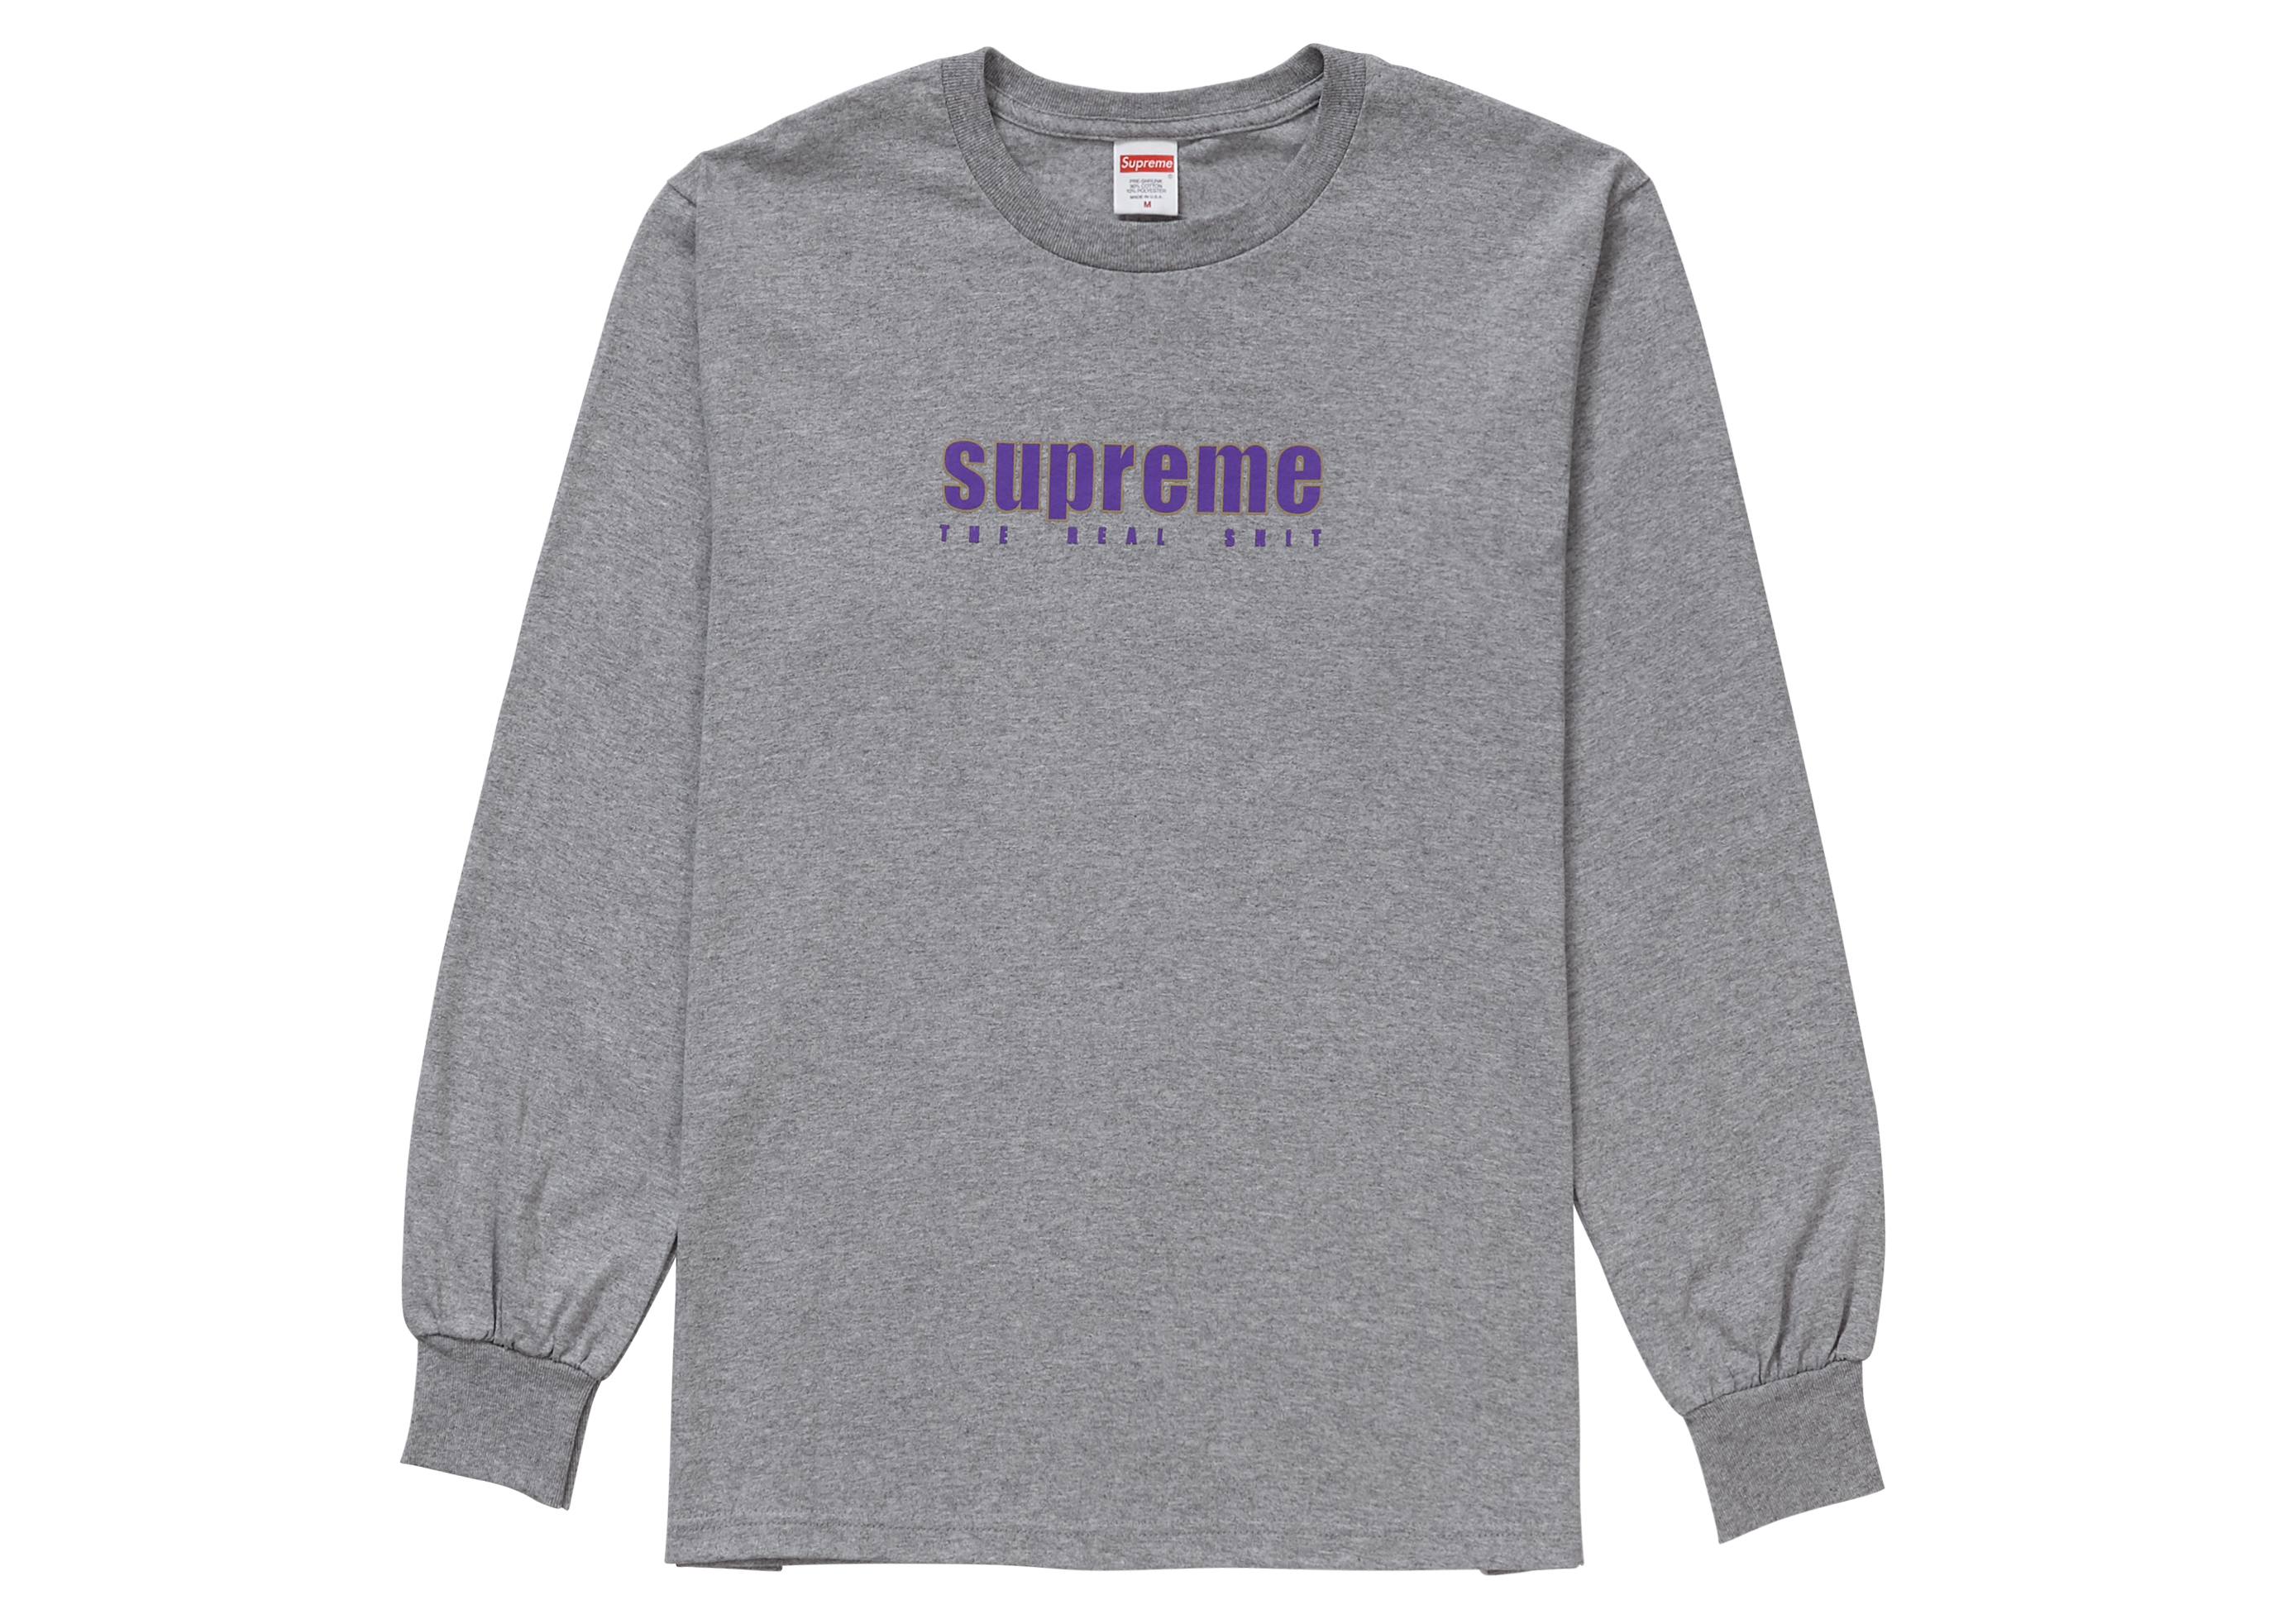 Supreme The Real Shit L/S Tee Heather Grey - SS19 Men's - US